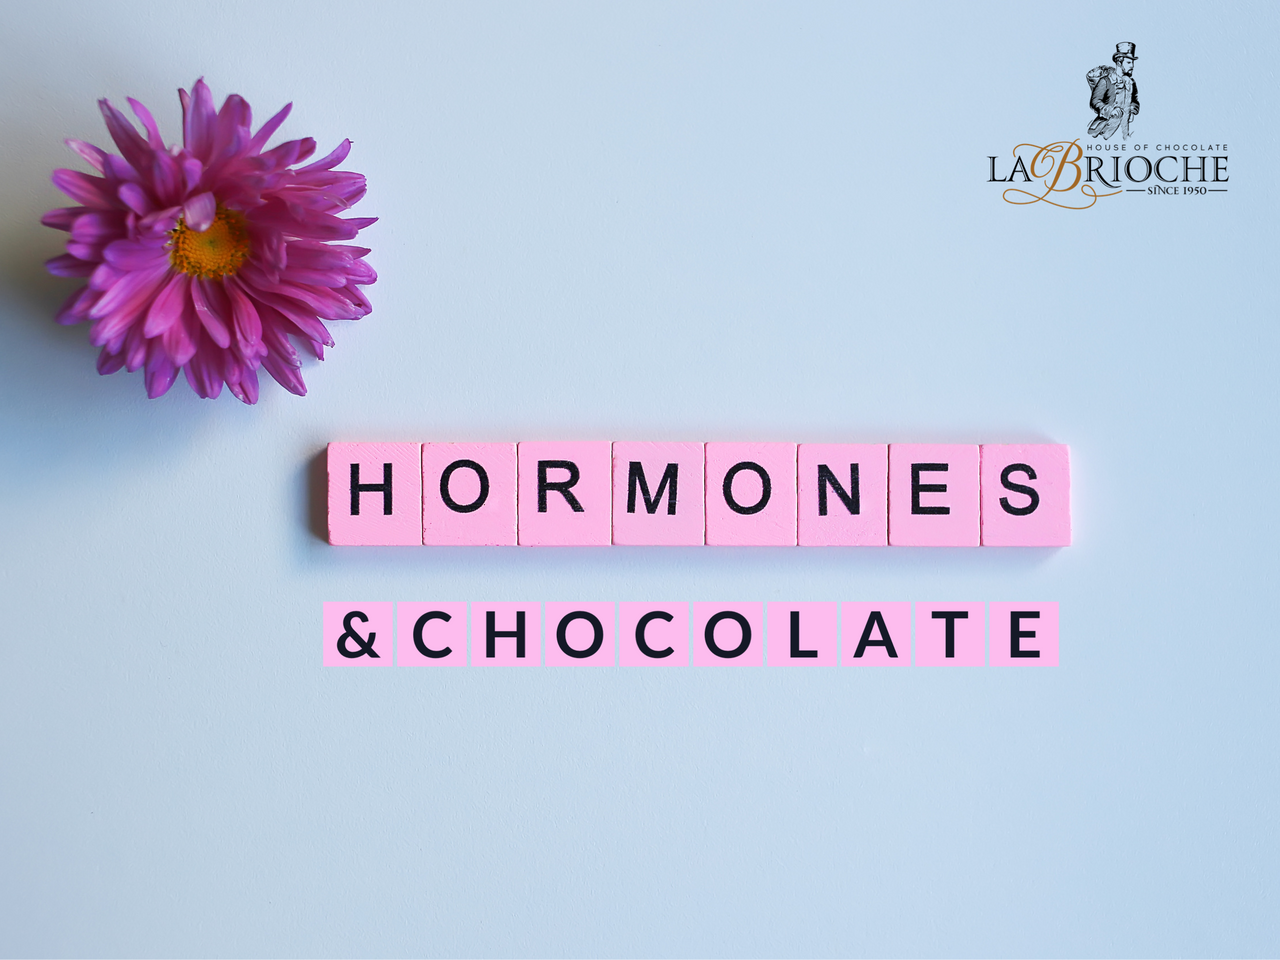 Do Chocolates Have an Effect on Our Hormones?